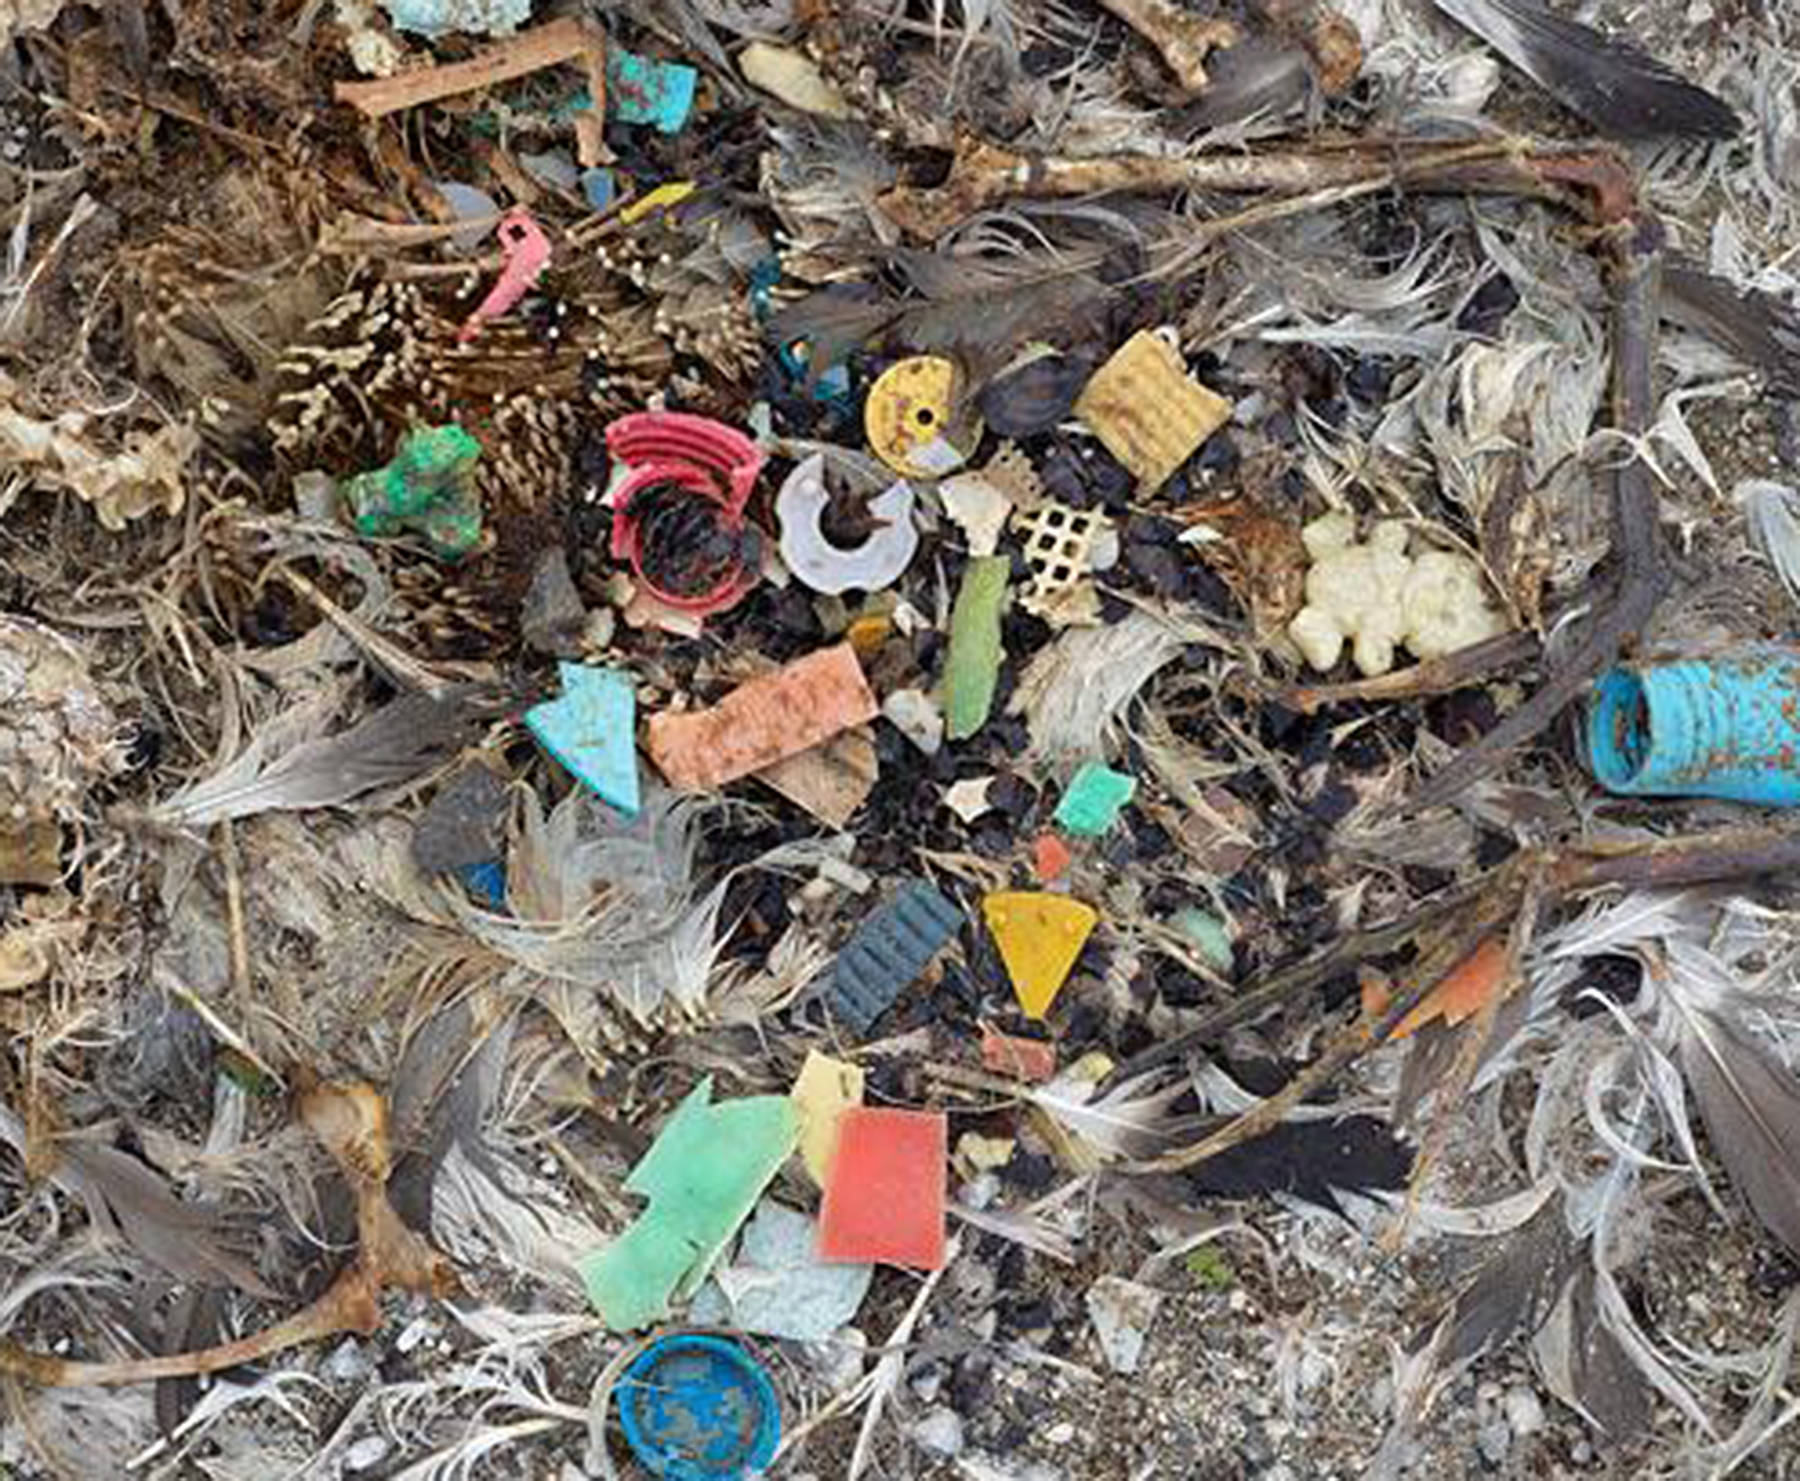 Bottle caps, printer cartridges, straws and cigarette lighters are among the detritus of modern life swallowed by the young albatross. (Photo provided by Chris Jordan)